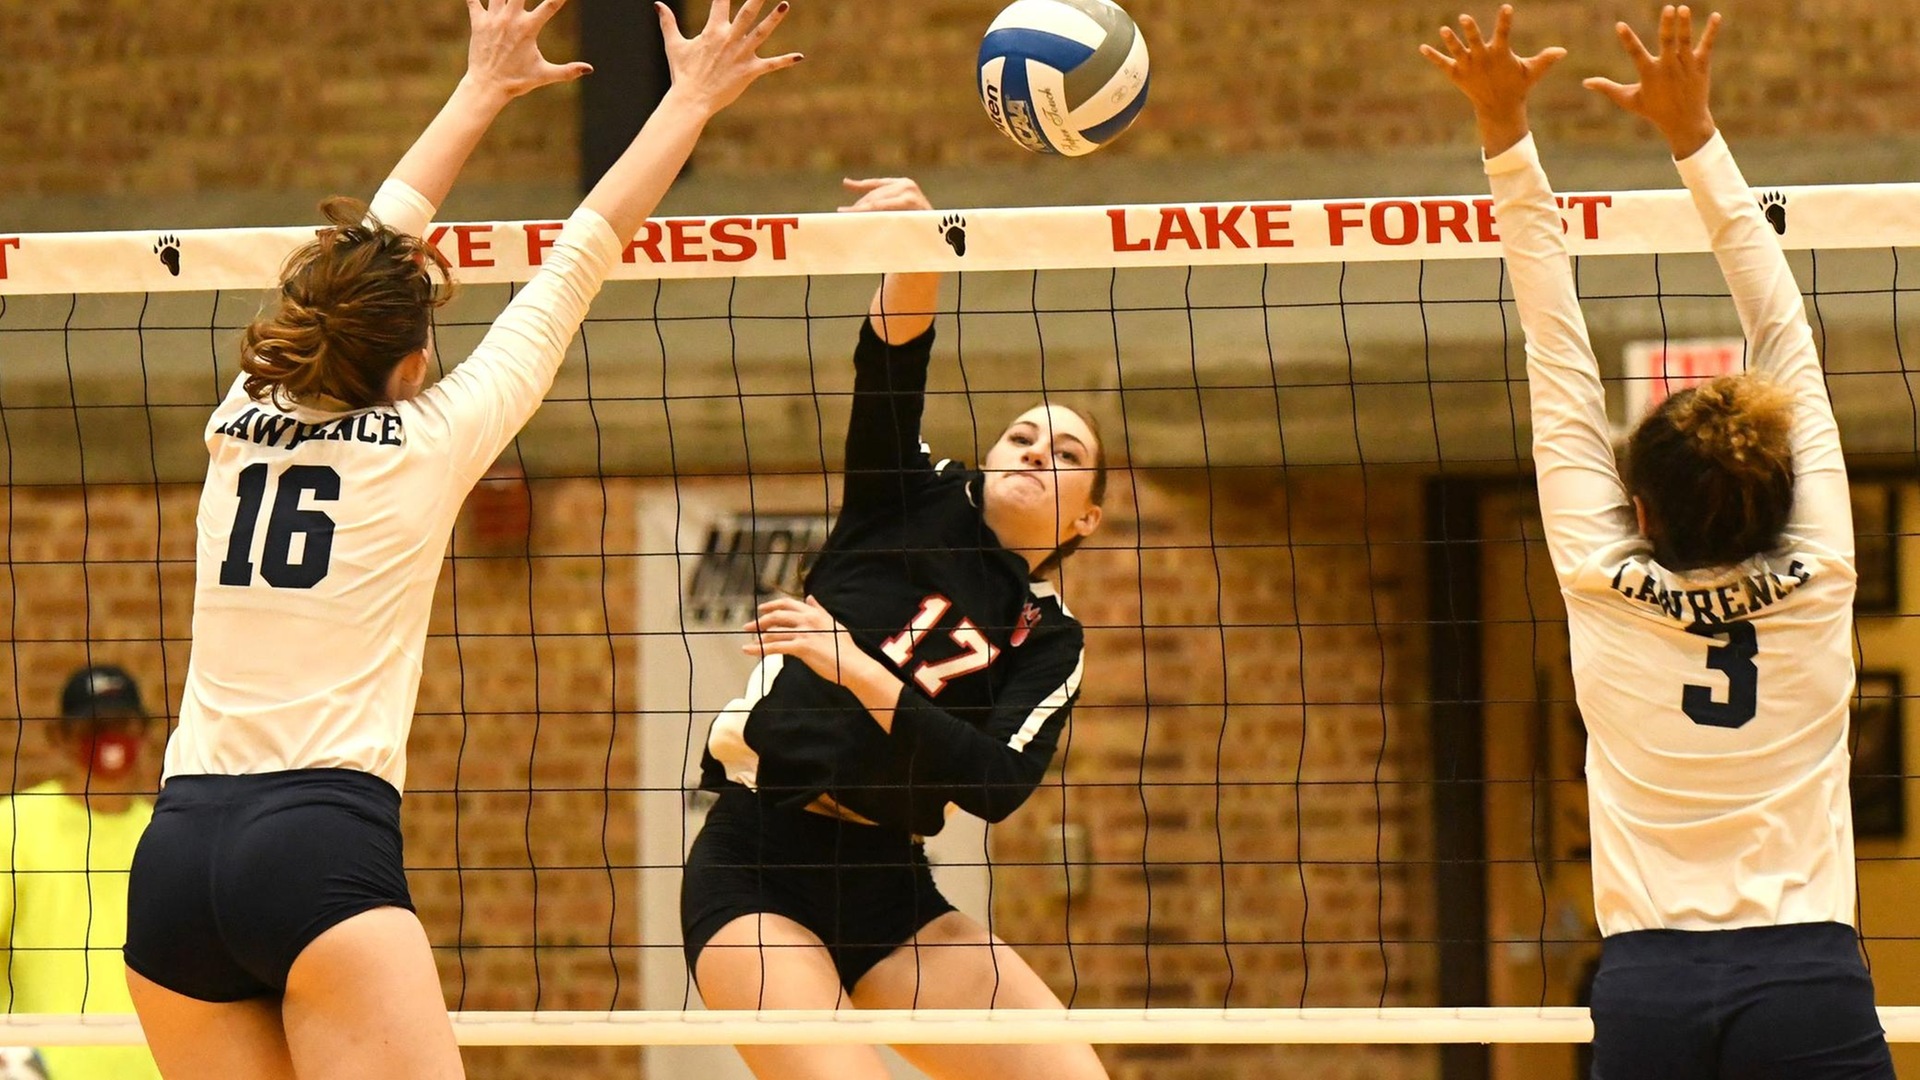 Lake Forest Sweeps Lawrence, Improves to 2-1 in MWC